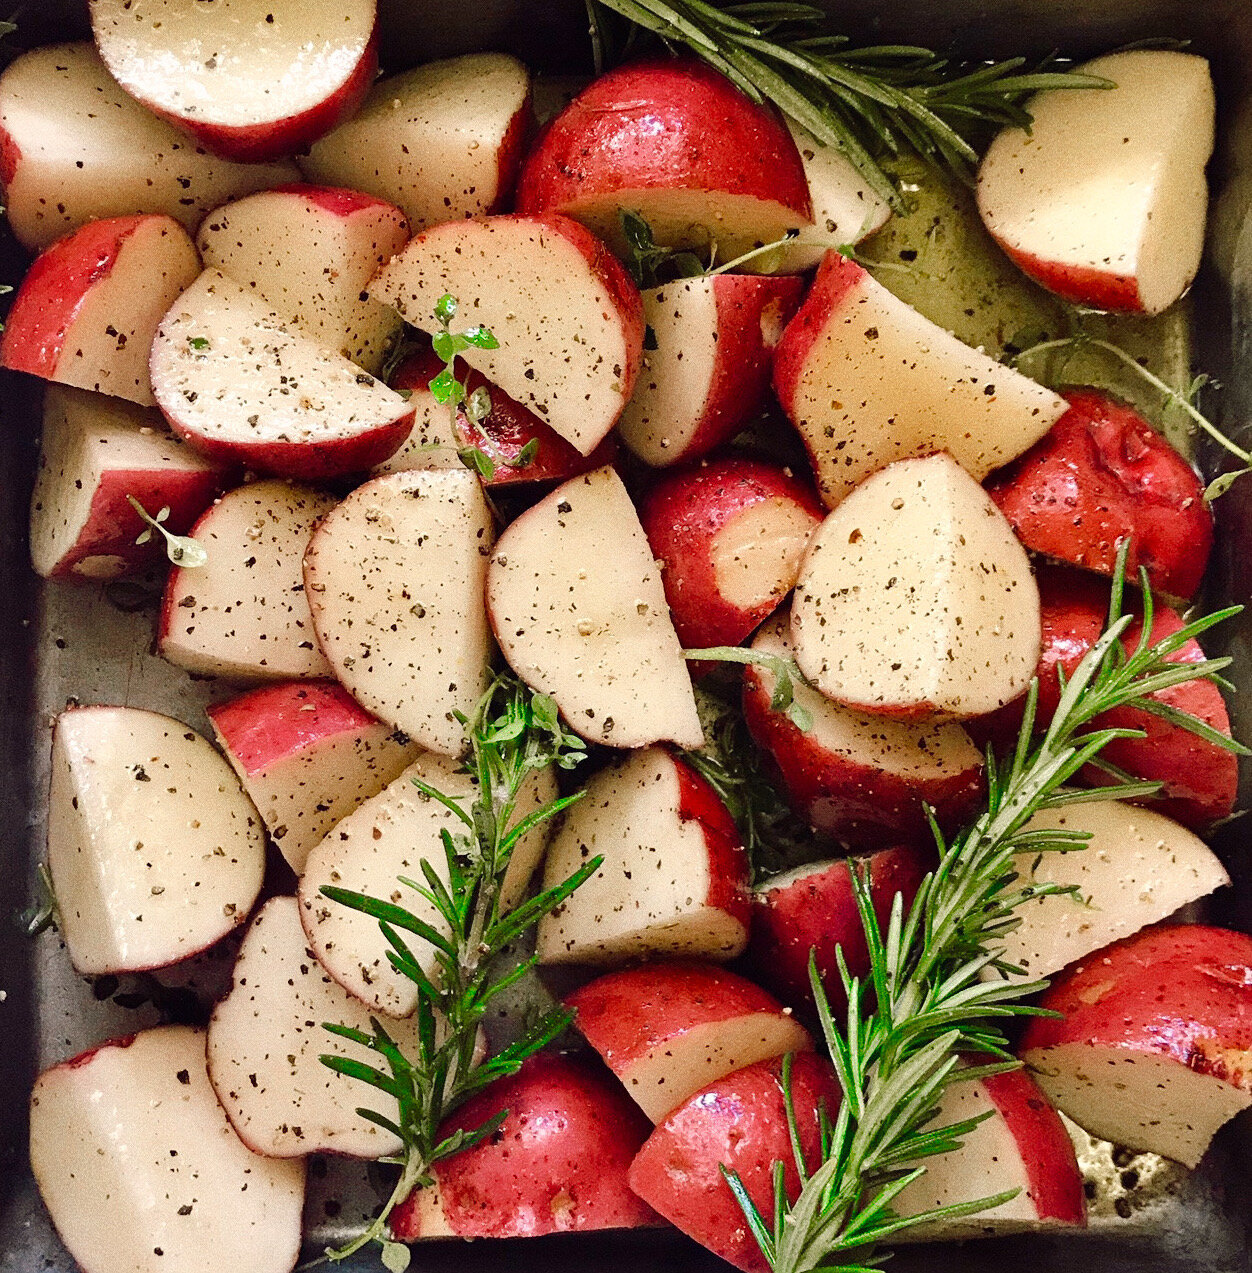 Red potatoes mixed with fresh herbs and seasoning ready for the oven